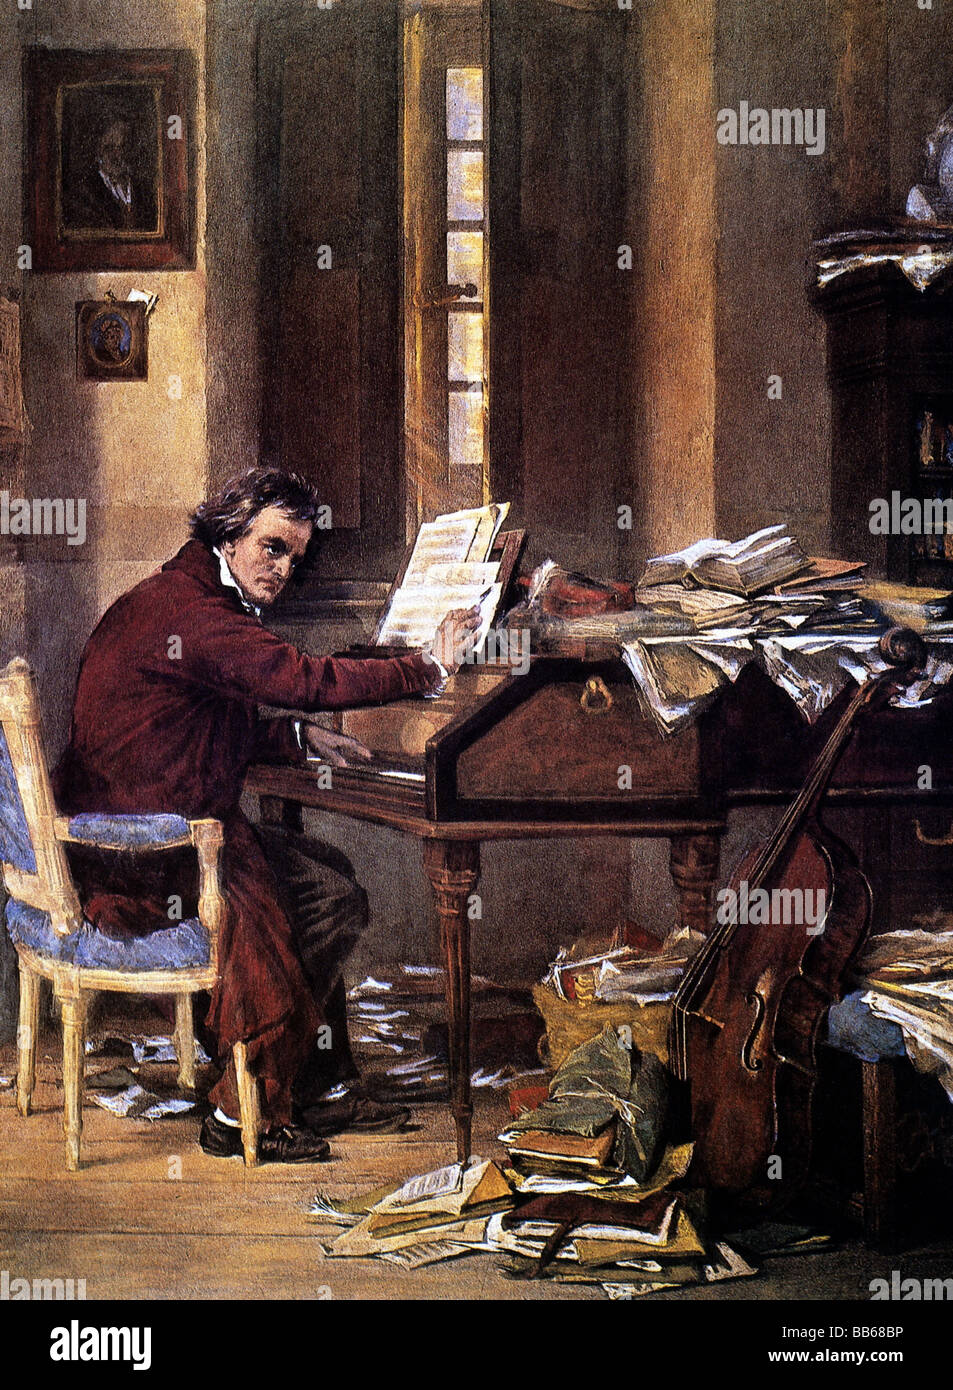 Beethoven, Ludwig van, 17.12.1770 - 26.3.1827, German composer, half length, at work, history painting by Carl Schloesser, 19th century, Stock Photo